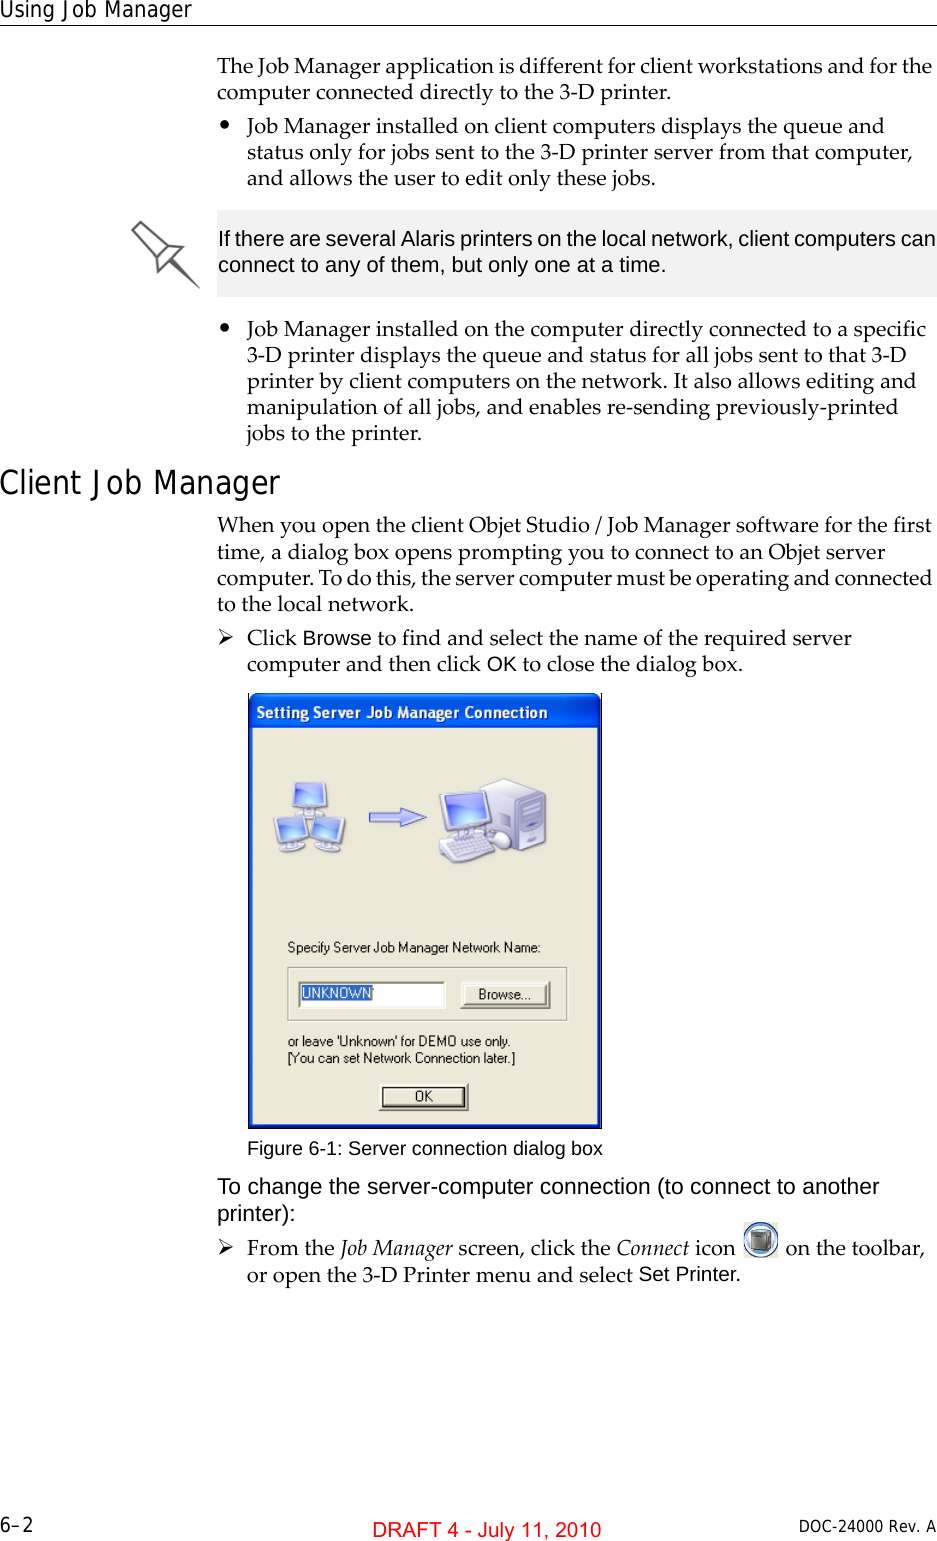 Using Job Manager6–2 DOC-24000 Rev. ATheJobManagerapplicationisdifferentforclientworkstationsandforthecomputerconnecteddirectlytothe3‐Dprinter.•JobManagerinstalledonclientcomputersdisplaysthequeueandstatusonlyforjobssenttothe3‐Dprinterserverfromthatcomputer,andallowstheusertoeditonlythesejobs.•JobManagerinstalledonthecomputerdirectlyconnectedtoaspecific3‐Dprinterdisplaysthequeueandstatusforalljobssenttothat3‐Dprinterbyclientcomputersonthenetwork.Italsoallowseditingandmanipulationofalljobs,andenablesre‐sendingpreviously‐printedjobstotheprinter.Client Job ManagerWhenyouopentheclientObjetStudio/JobManagersoftwareforthefirsttime,adialogboxopenspromptingyoutoconnecttoanObjetservercomputer.Todothis,theservercomputermustbeoperatingandconnectedtothelocalnetwork.¾ClickBrowsetofindandselectthenameoftherequiredservercomputerandthenclickOKtoclosethedialogbox.Figure 6-1: Server connection dialog boxTo change the server-computer connection (to connect to another printer):¾FromtheJobManagerscreen,clicktheConnecticononthetoolbar,oropenthe3‐DPrintermenuandselectSet Printer.If there are several Alaris printers on the local network, client computers can connect to any of them, but only one at a time.DRAFT 4 - July 11, 2010